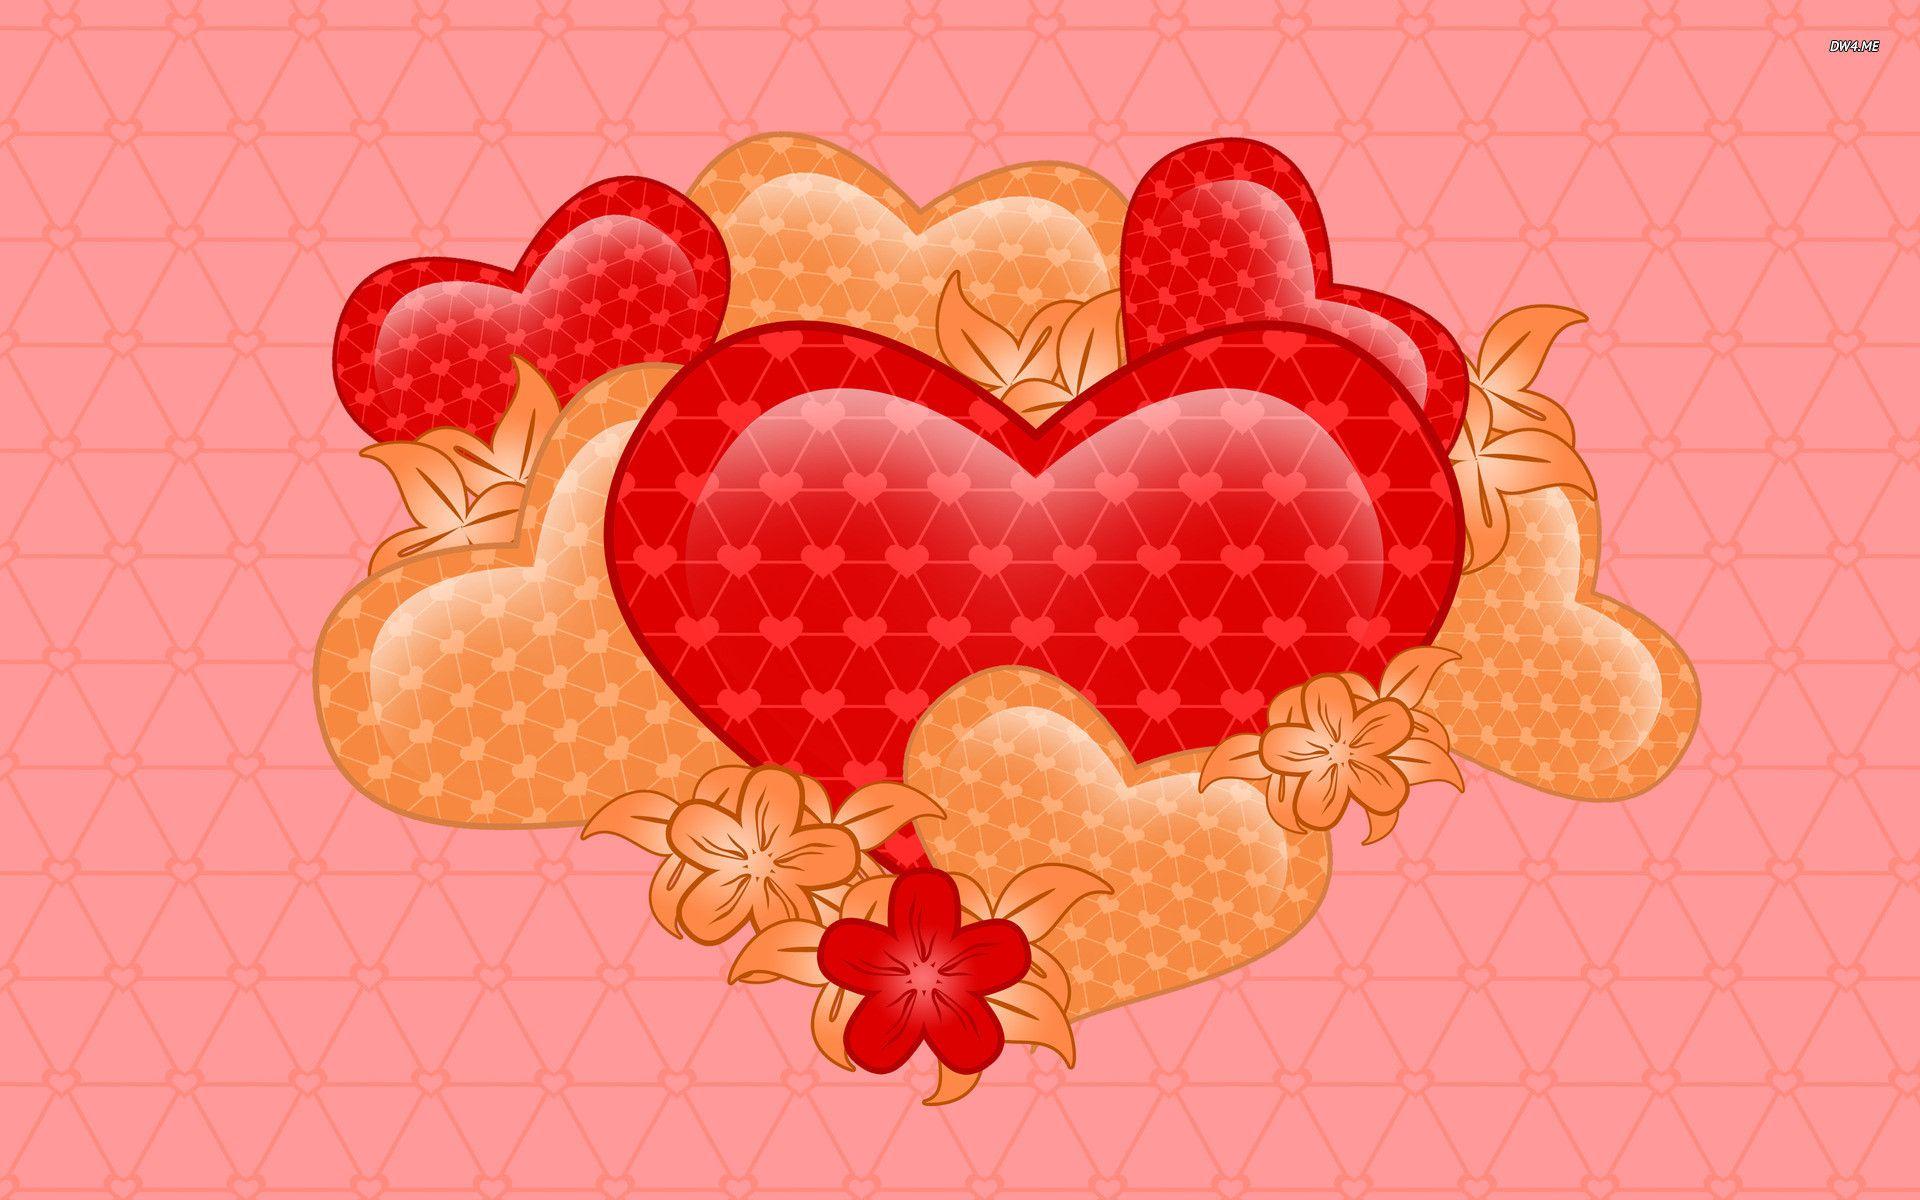 Hearts and flowers wallpapers